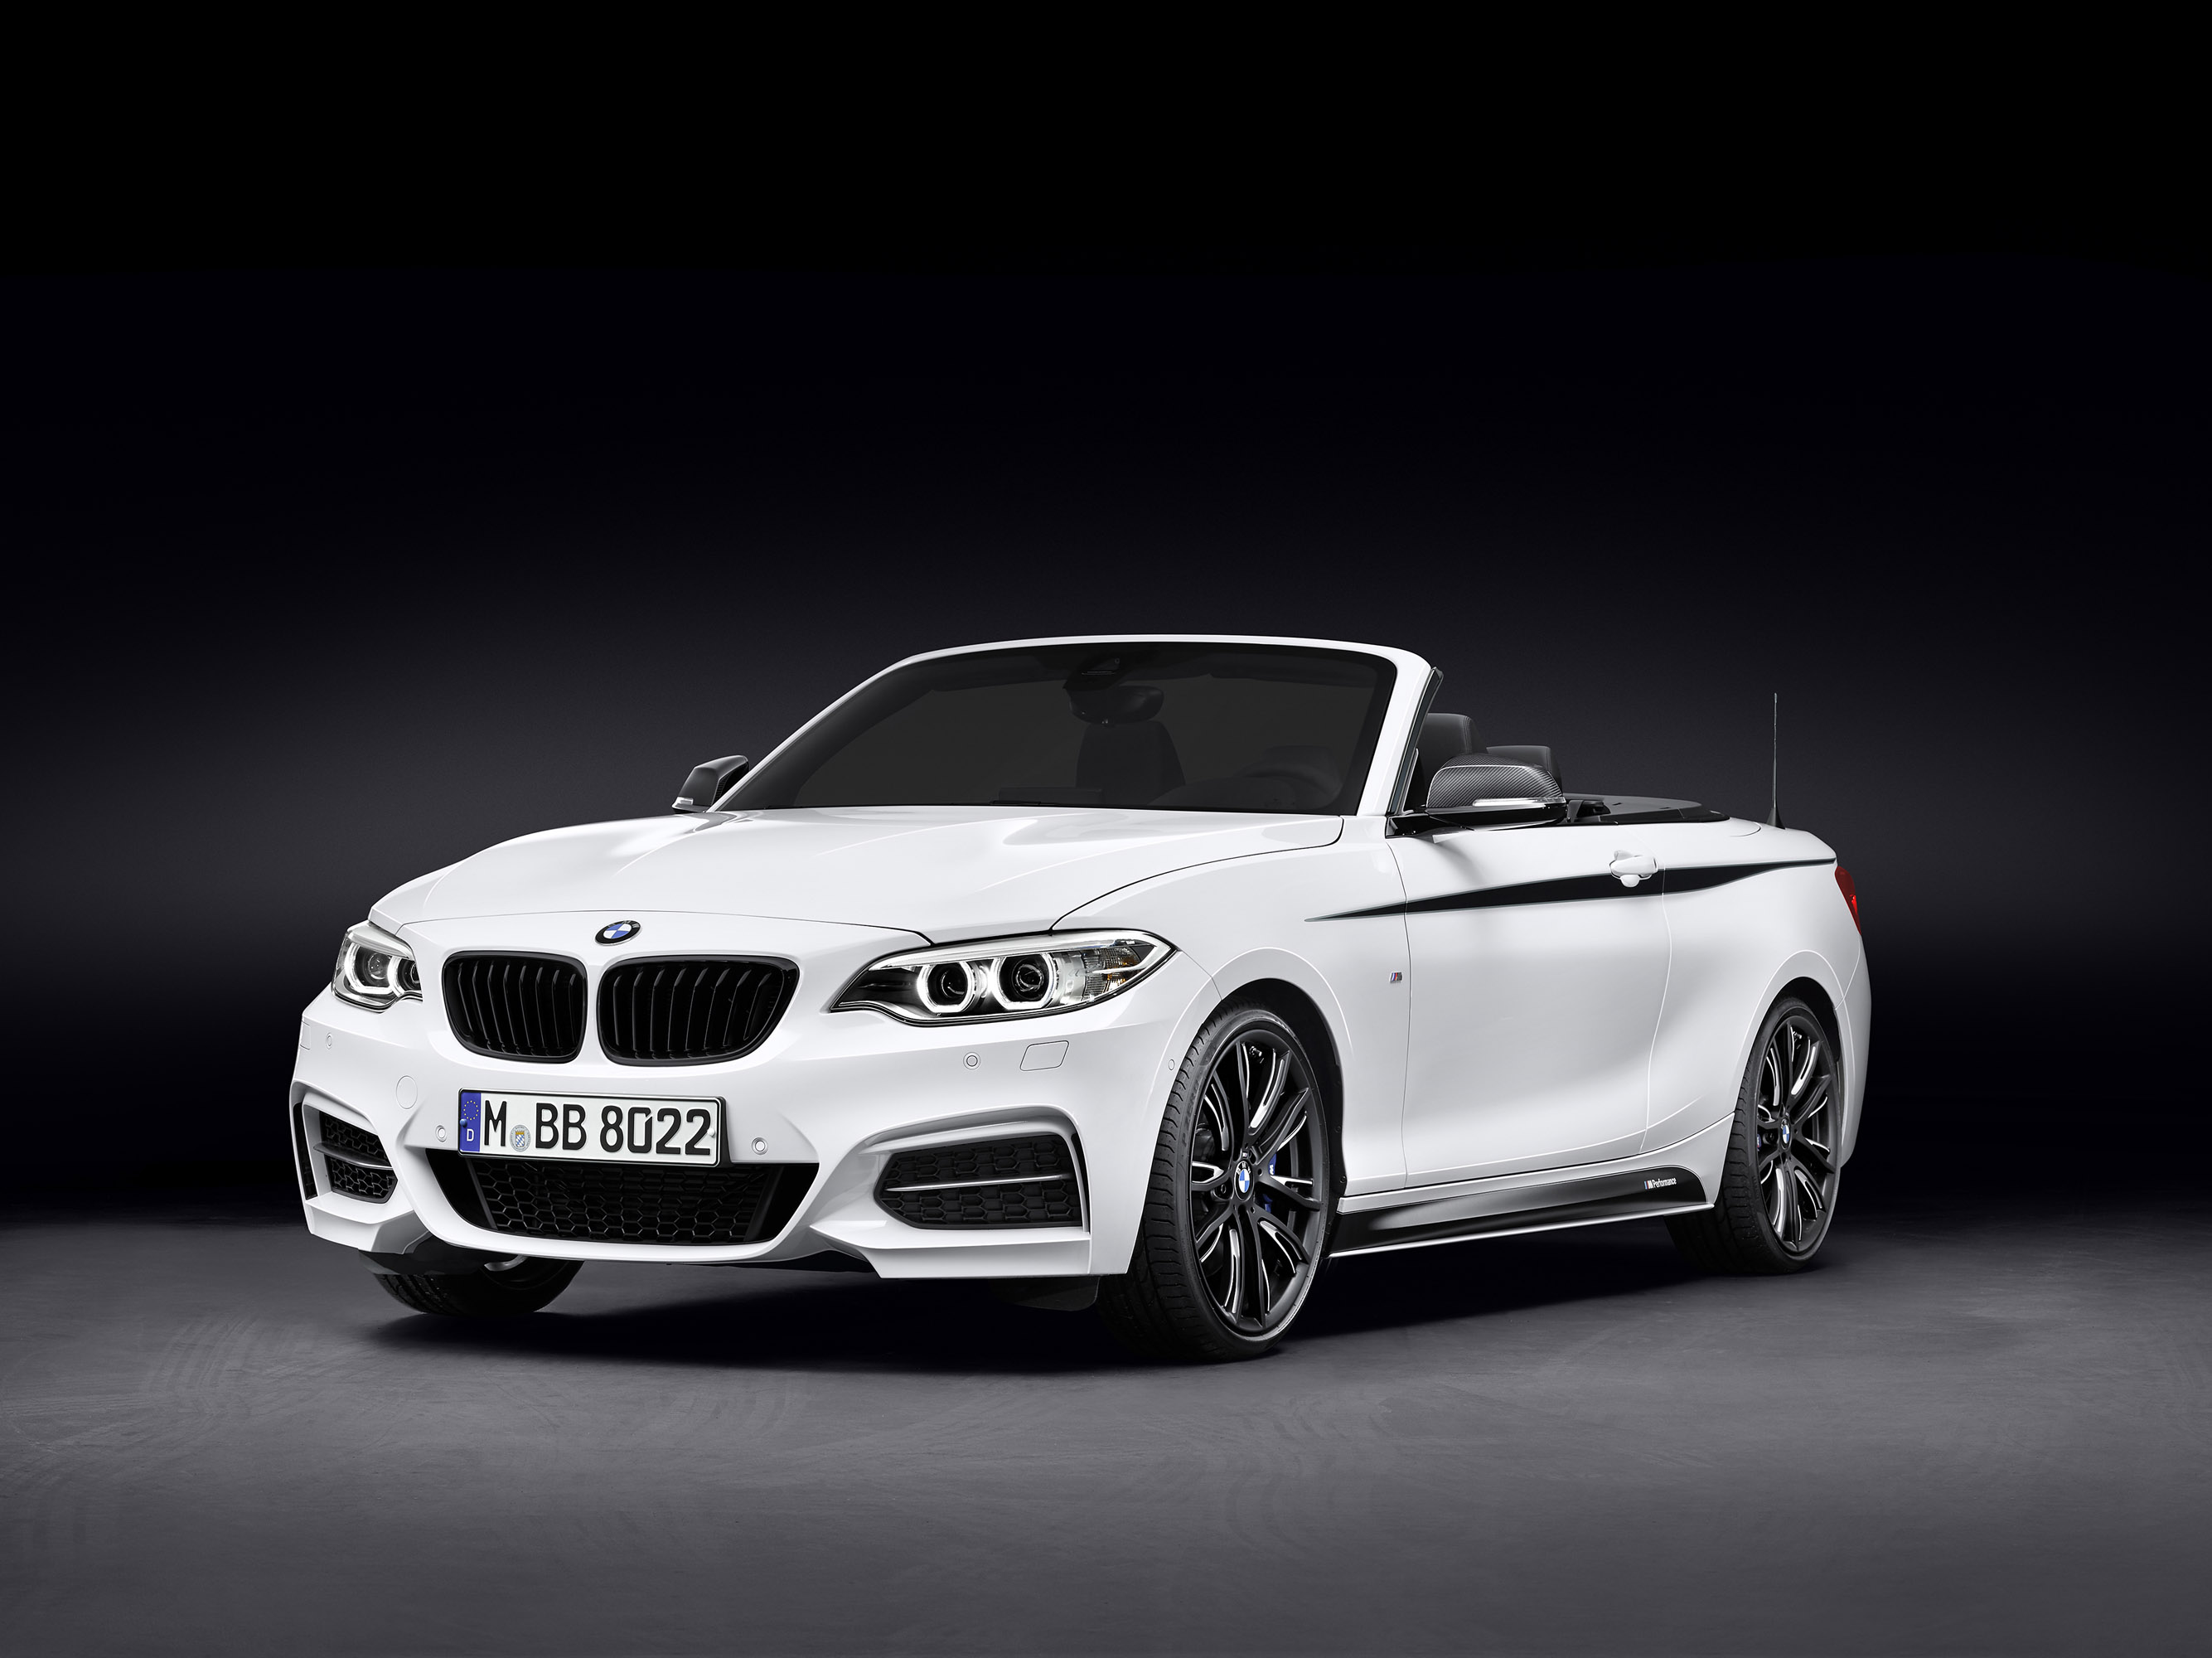 BMW 2 Series Convertible with M Performance Parts